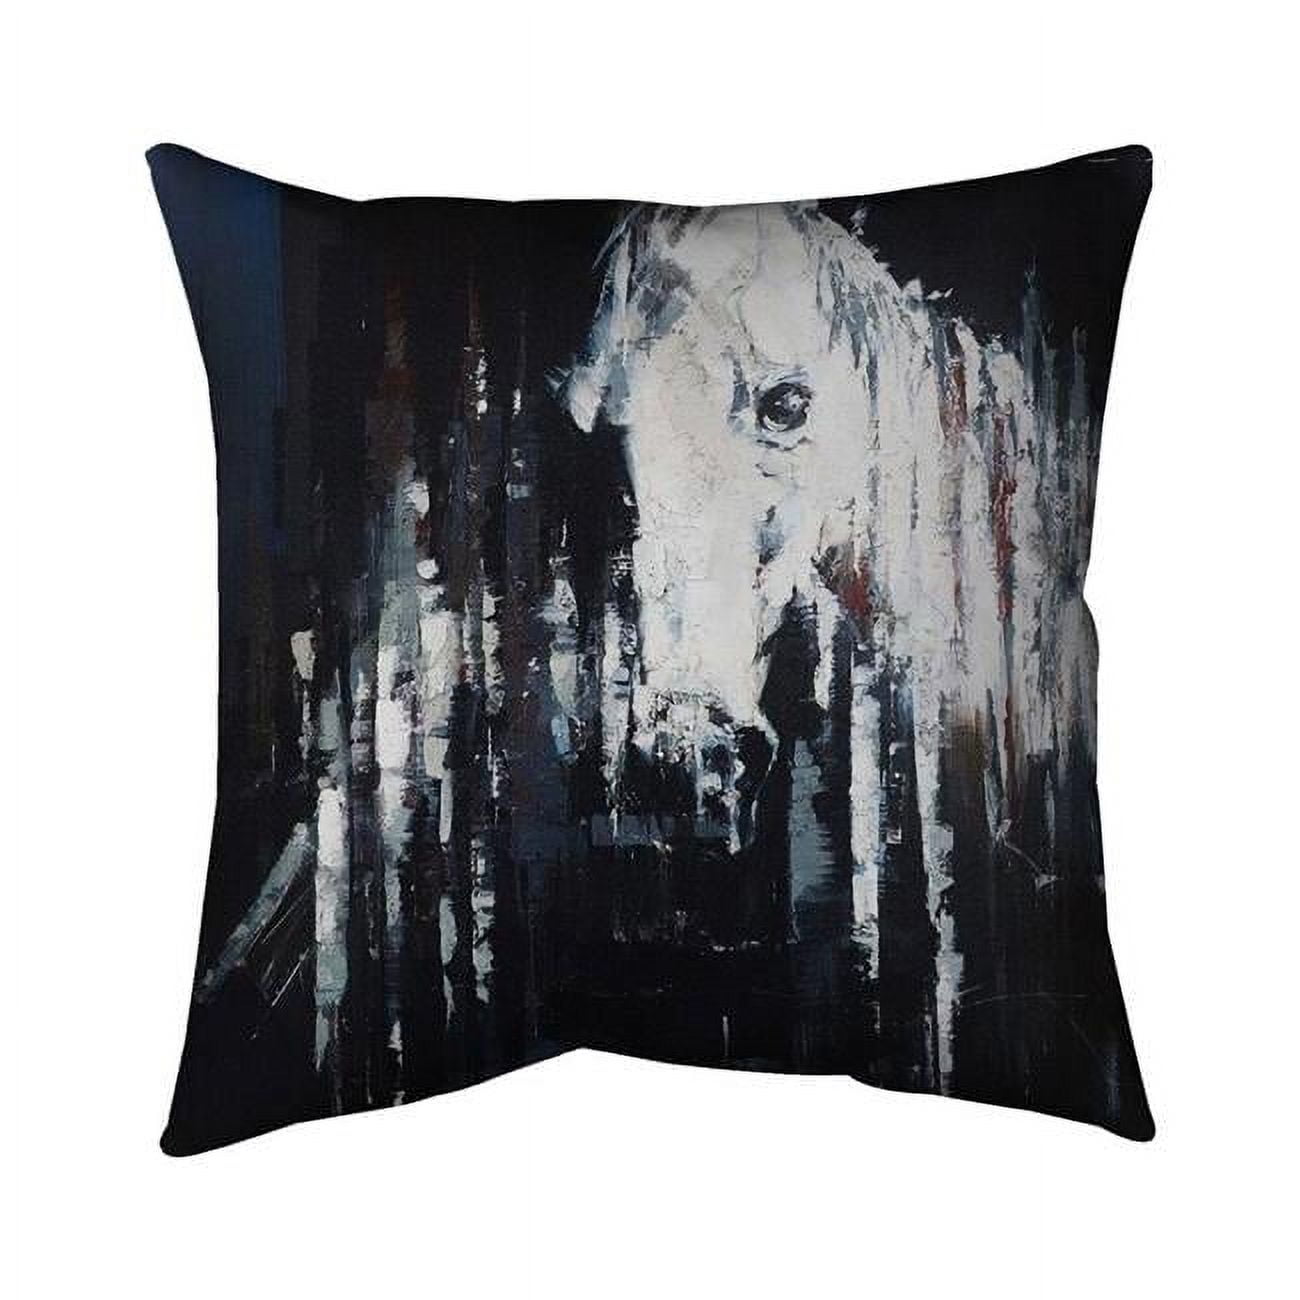 Begin Home Decor 5543-2020-AN87 20 x 20 in. Abstract Horse on Black Background-Double Sided Print Indoor Pillow Cover